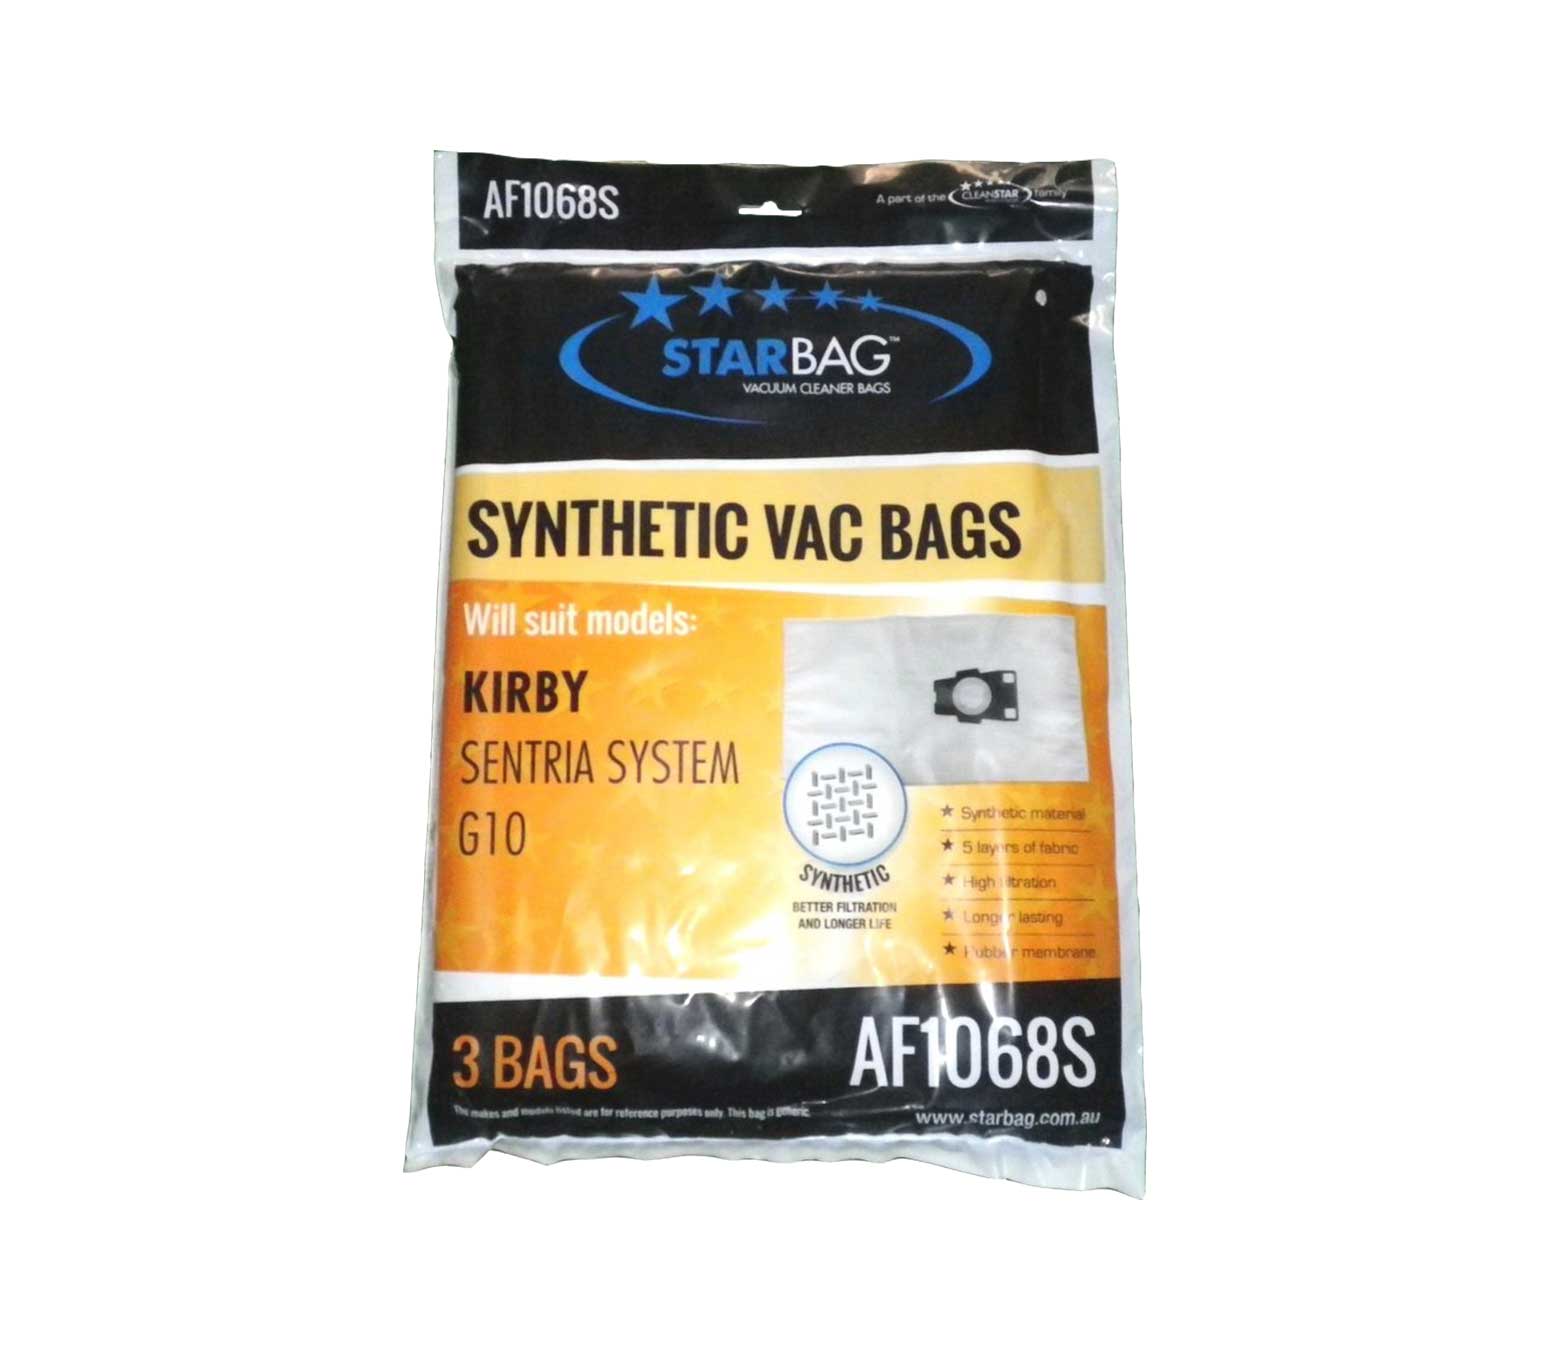 Kirby G10 Sentria Synthetic Vacuum Cleaner Bags (3 Bags).